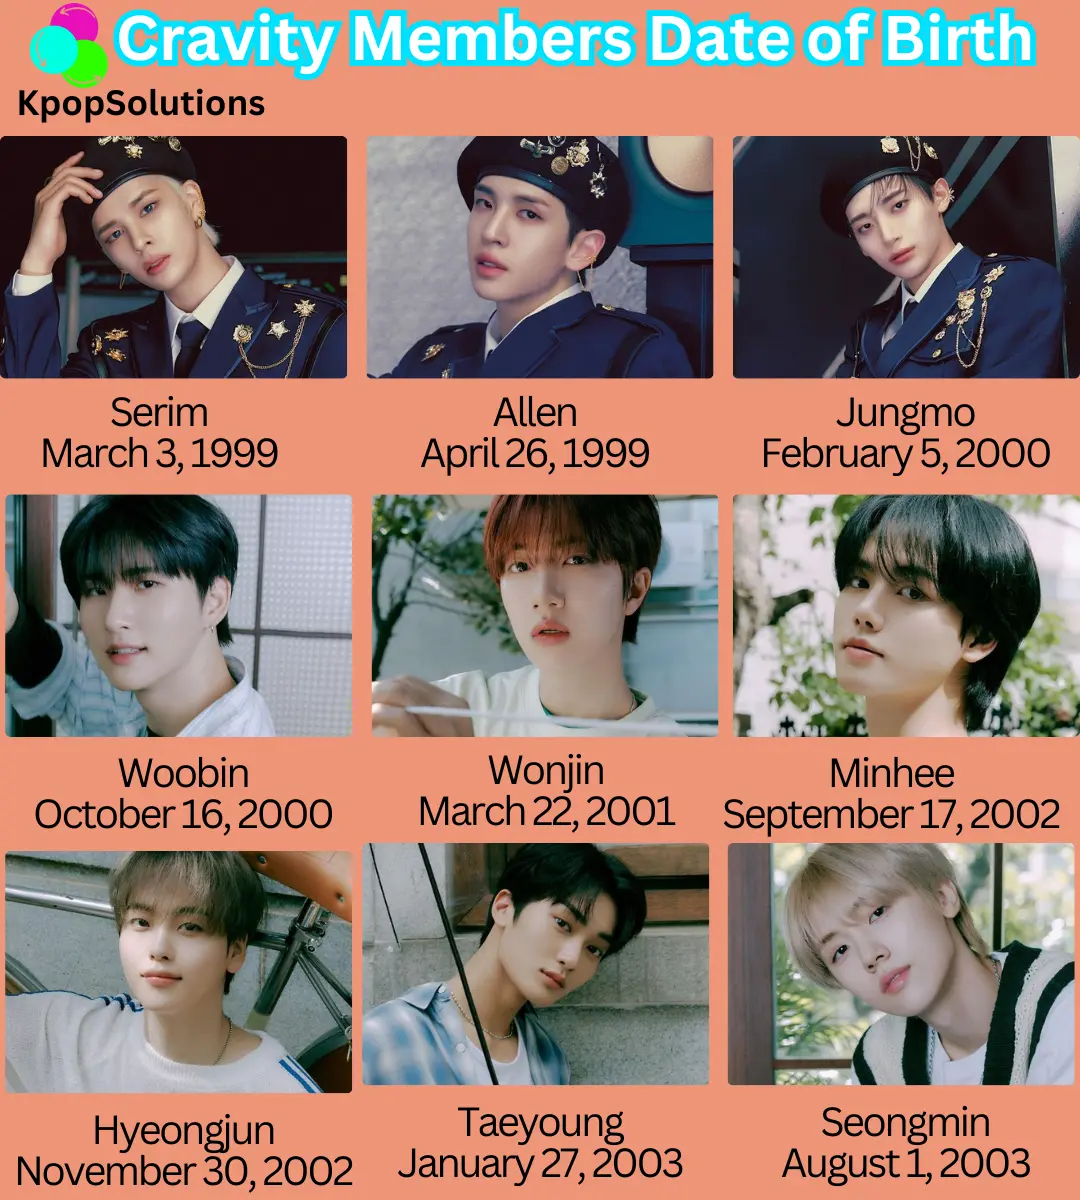 Cravity members: Serim, Allen, Jungmo, Woobin, Wonjin, Minhee, Hyeongjun, Taeyoung, and Seongmin current ages and date of birth in order.